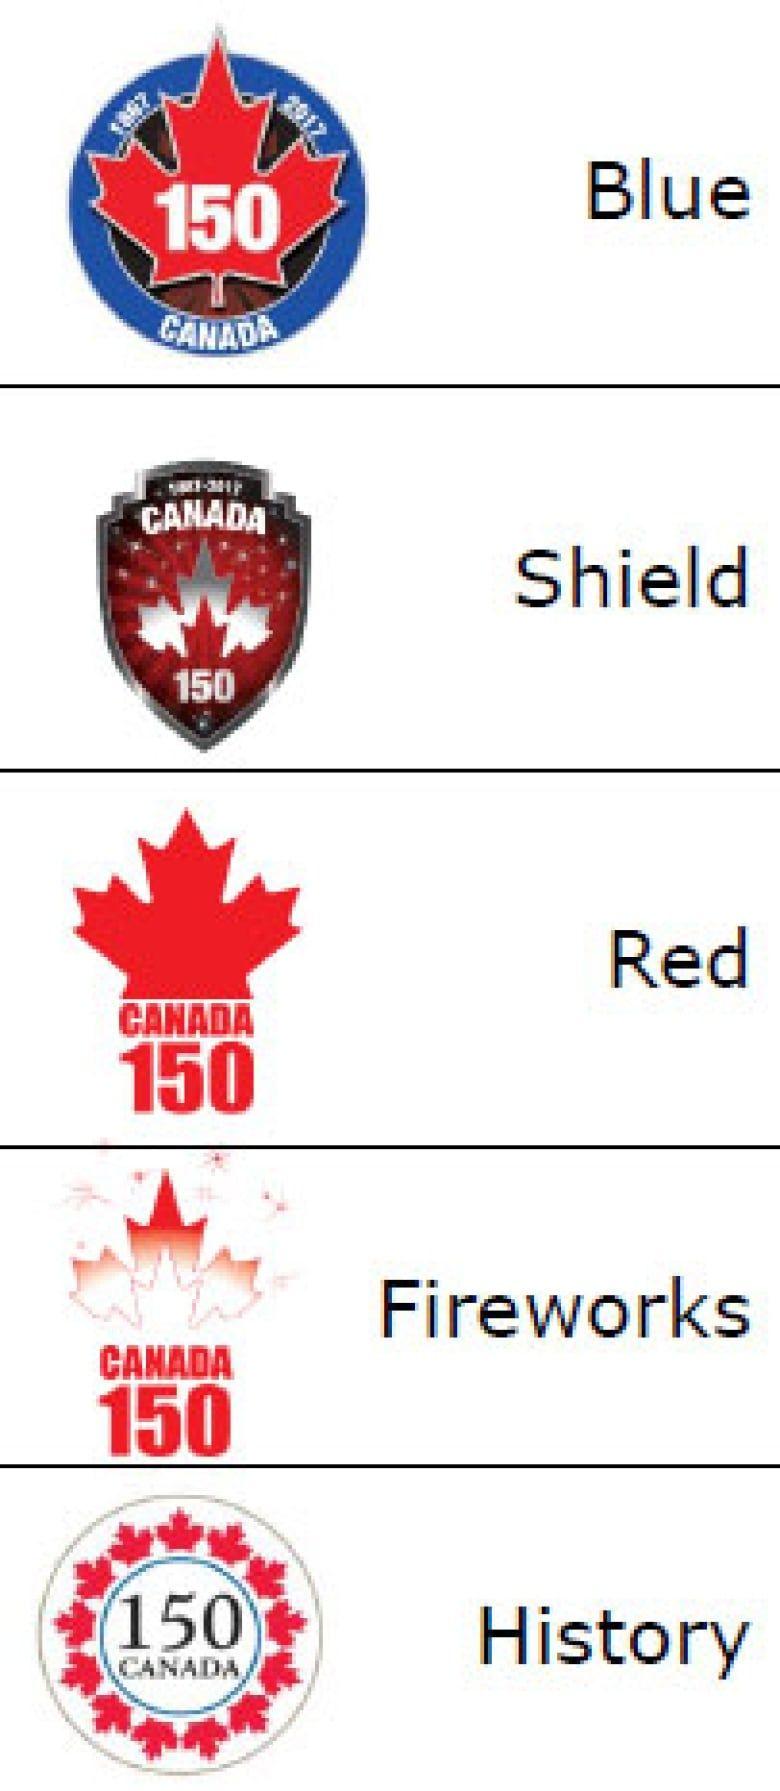 Canada Government Logo - Canada's 150th birthday logos tested ahead of 2017 anniversary. CBC